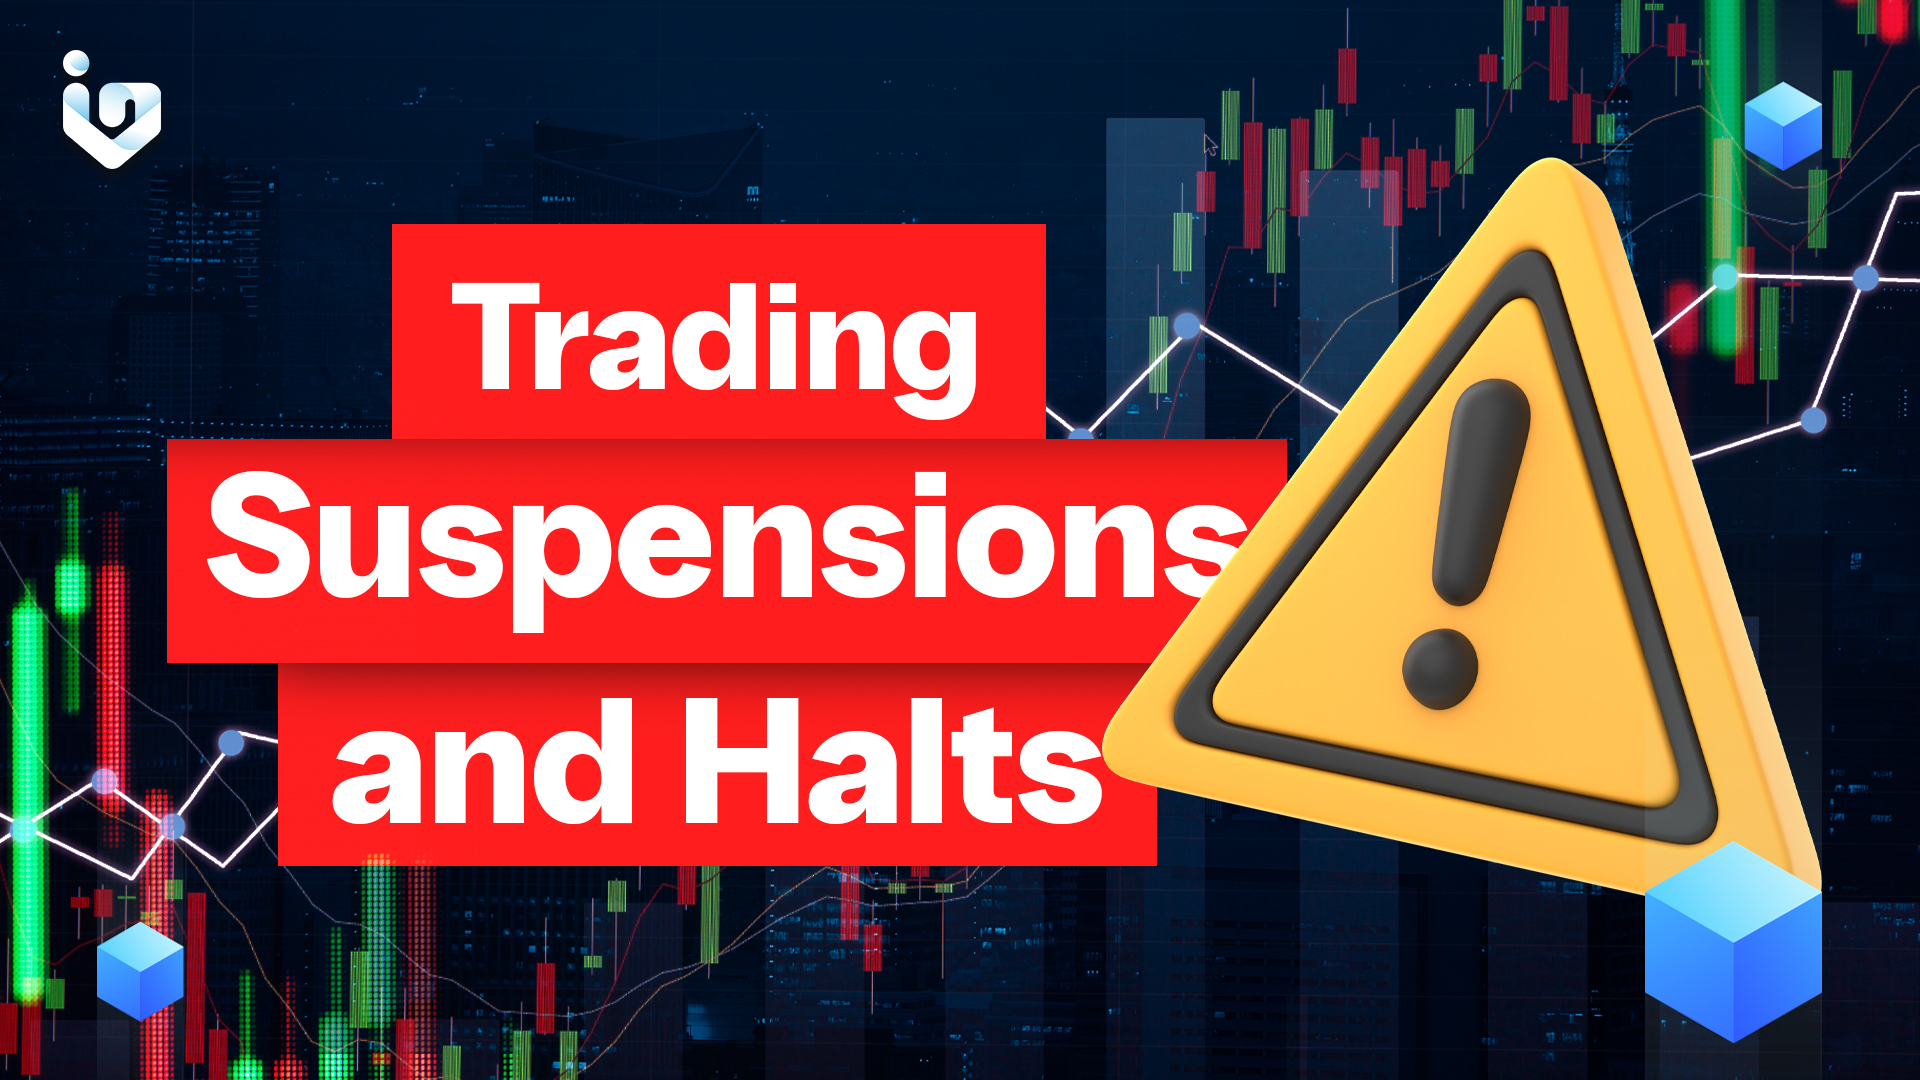 Trading Suspensions and Halts